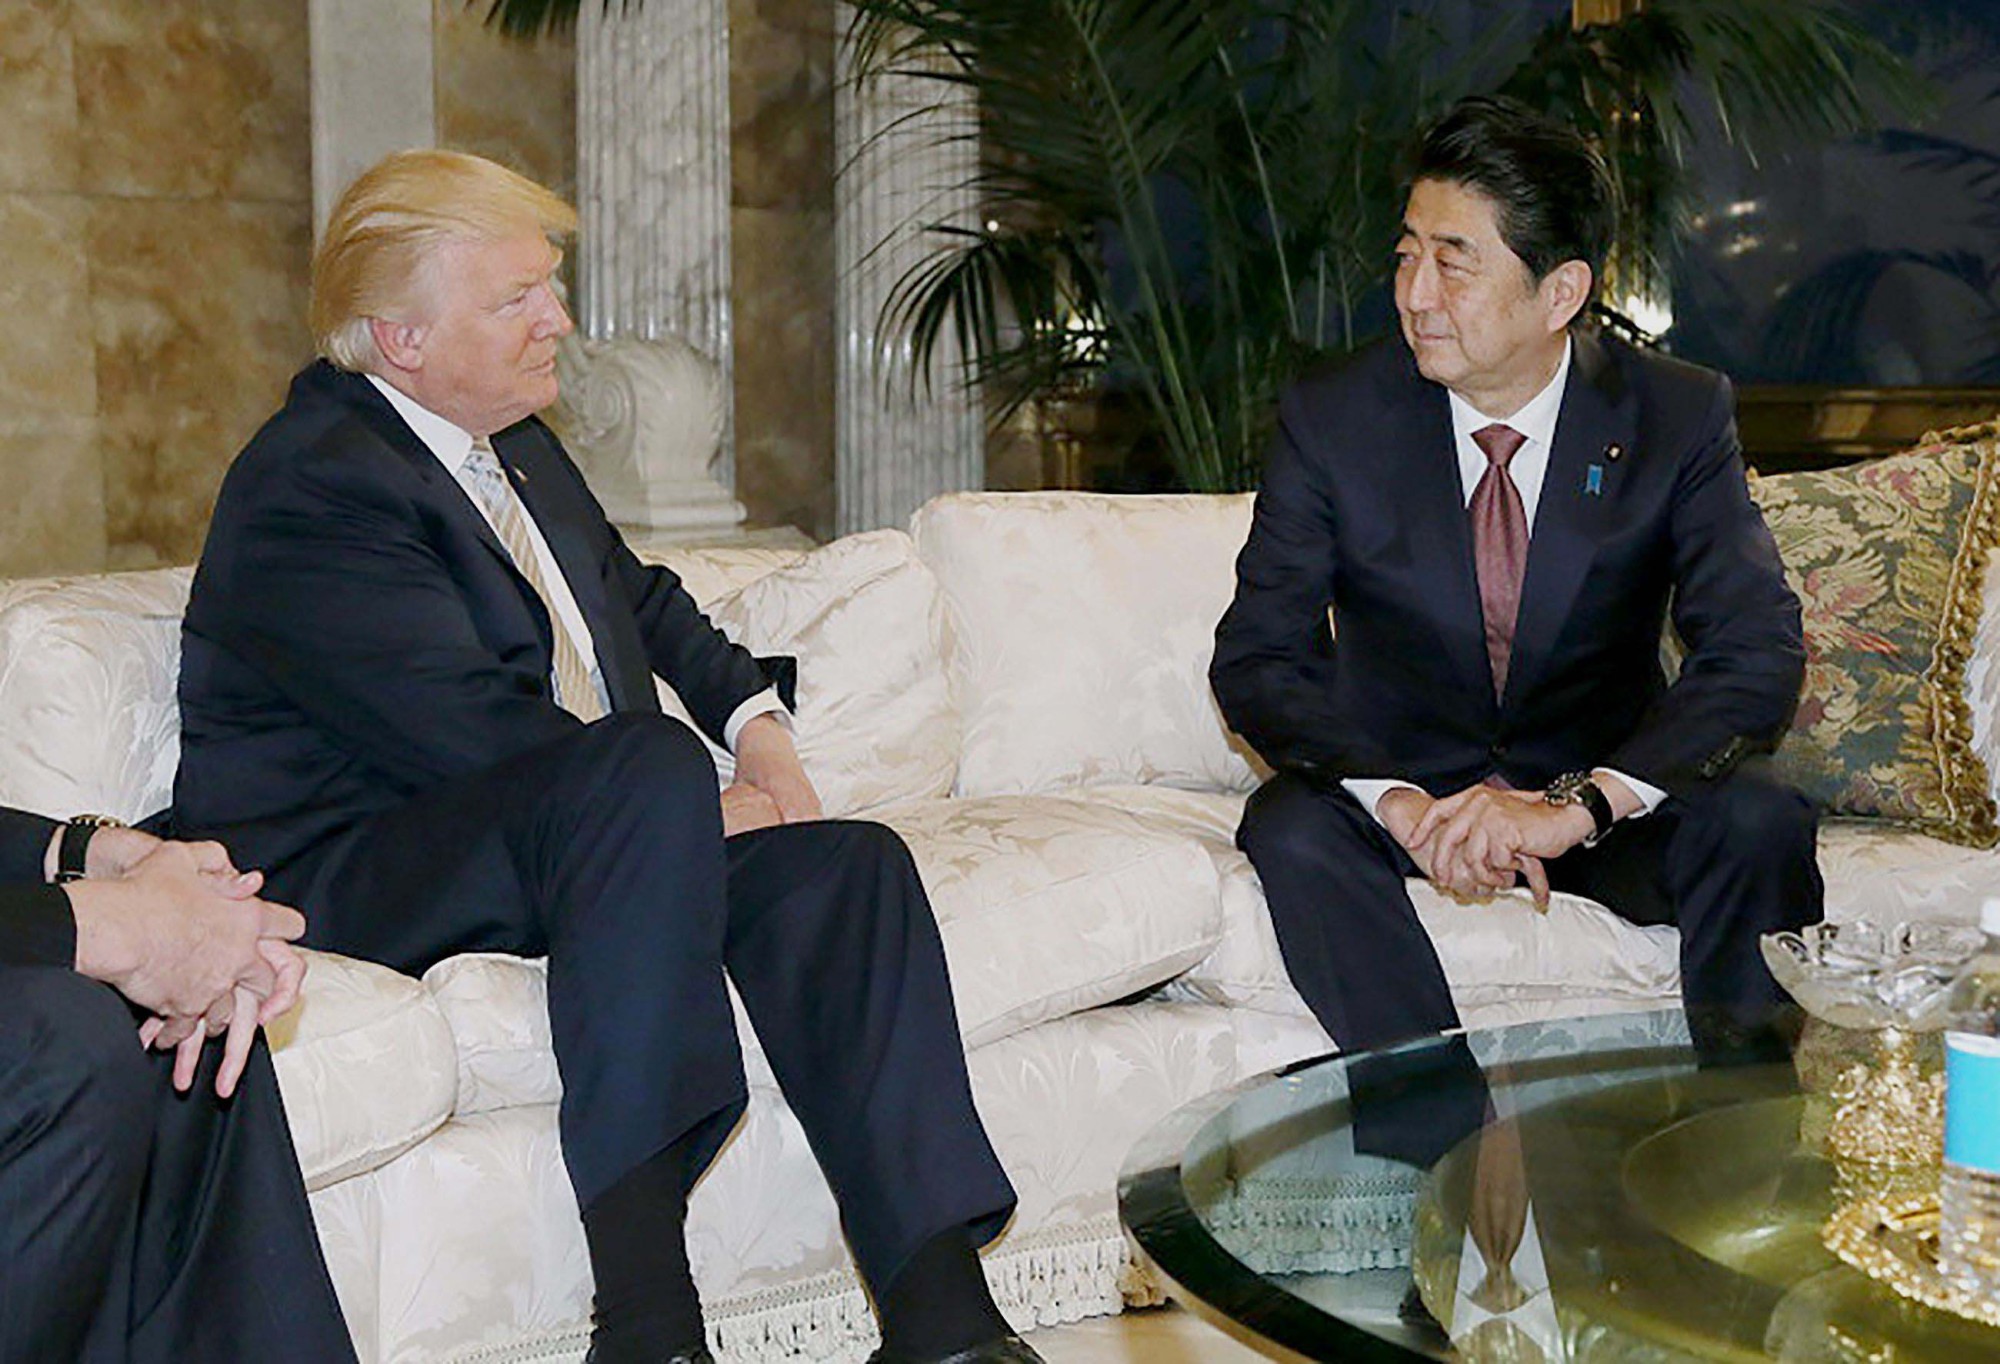 Prime Minister Shinzo Abe meets with U.S. president-elect Donald Trump for the first time in New York on Nov. 17. | AFP-JIJI